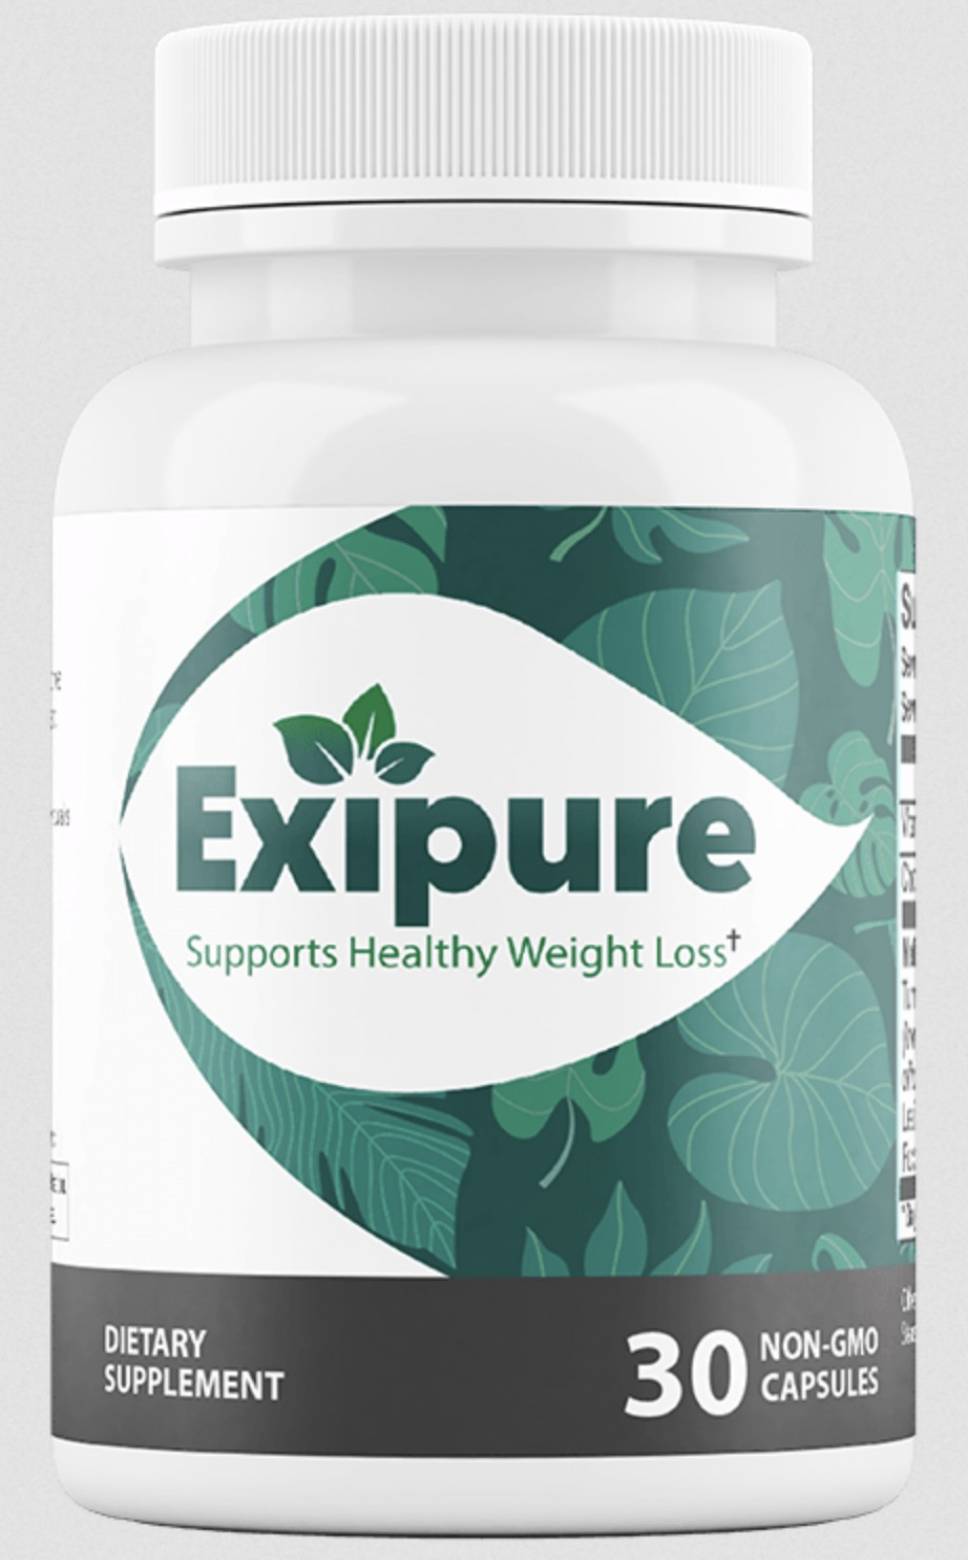 Does Exipure Work To Lose Weight